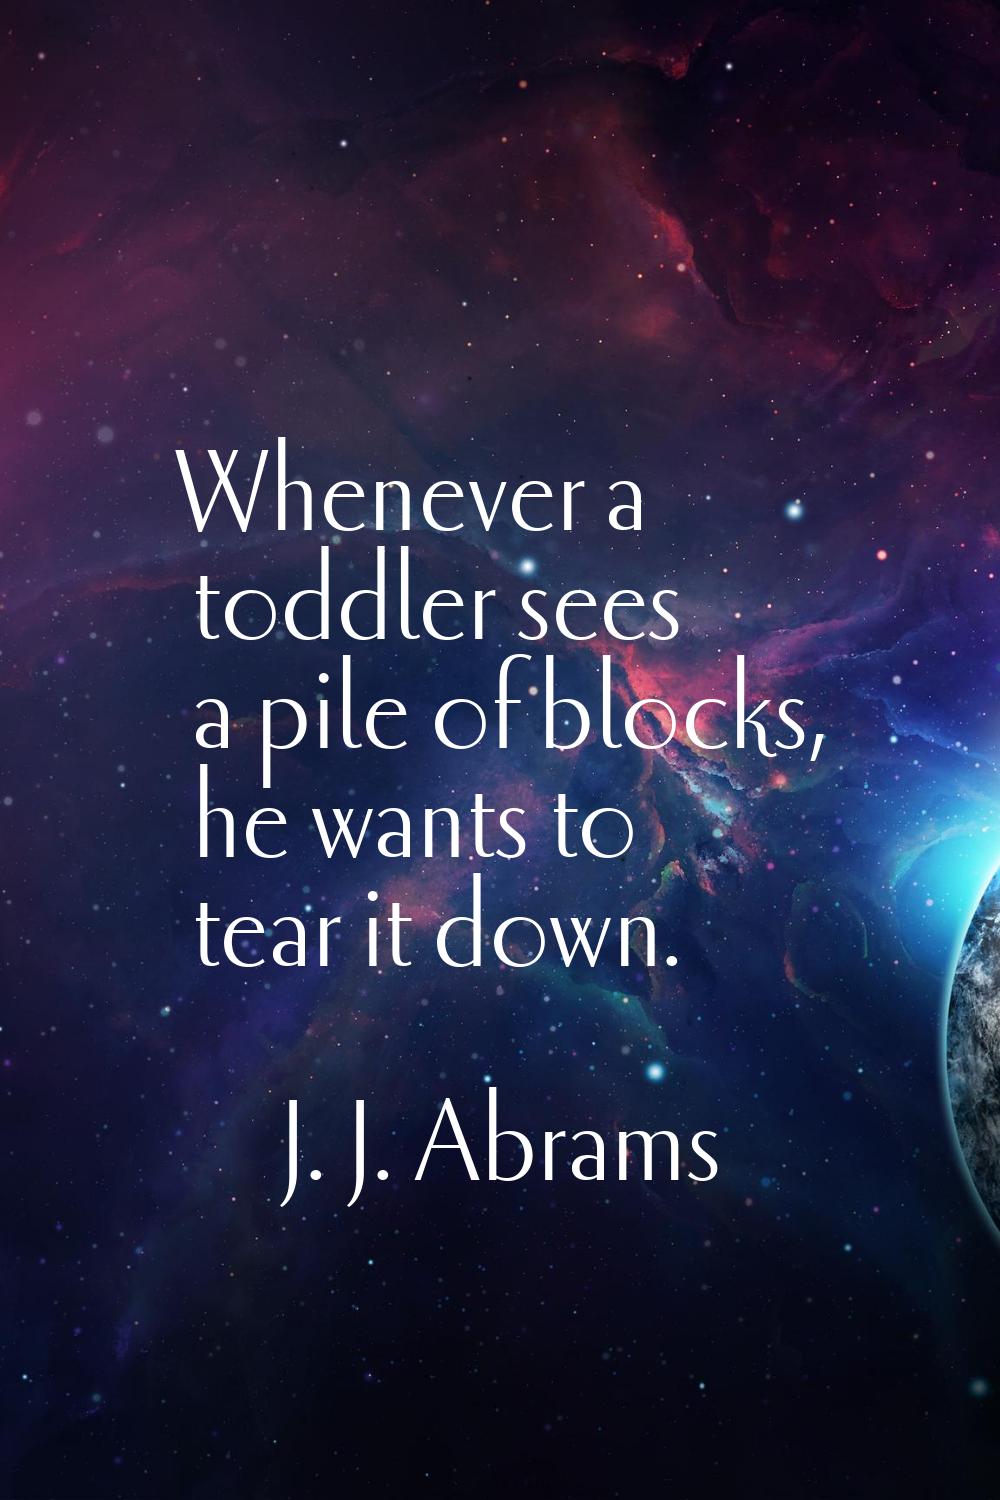 Whenever a toddler sees a pile of blocks, he wants to tear it down.